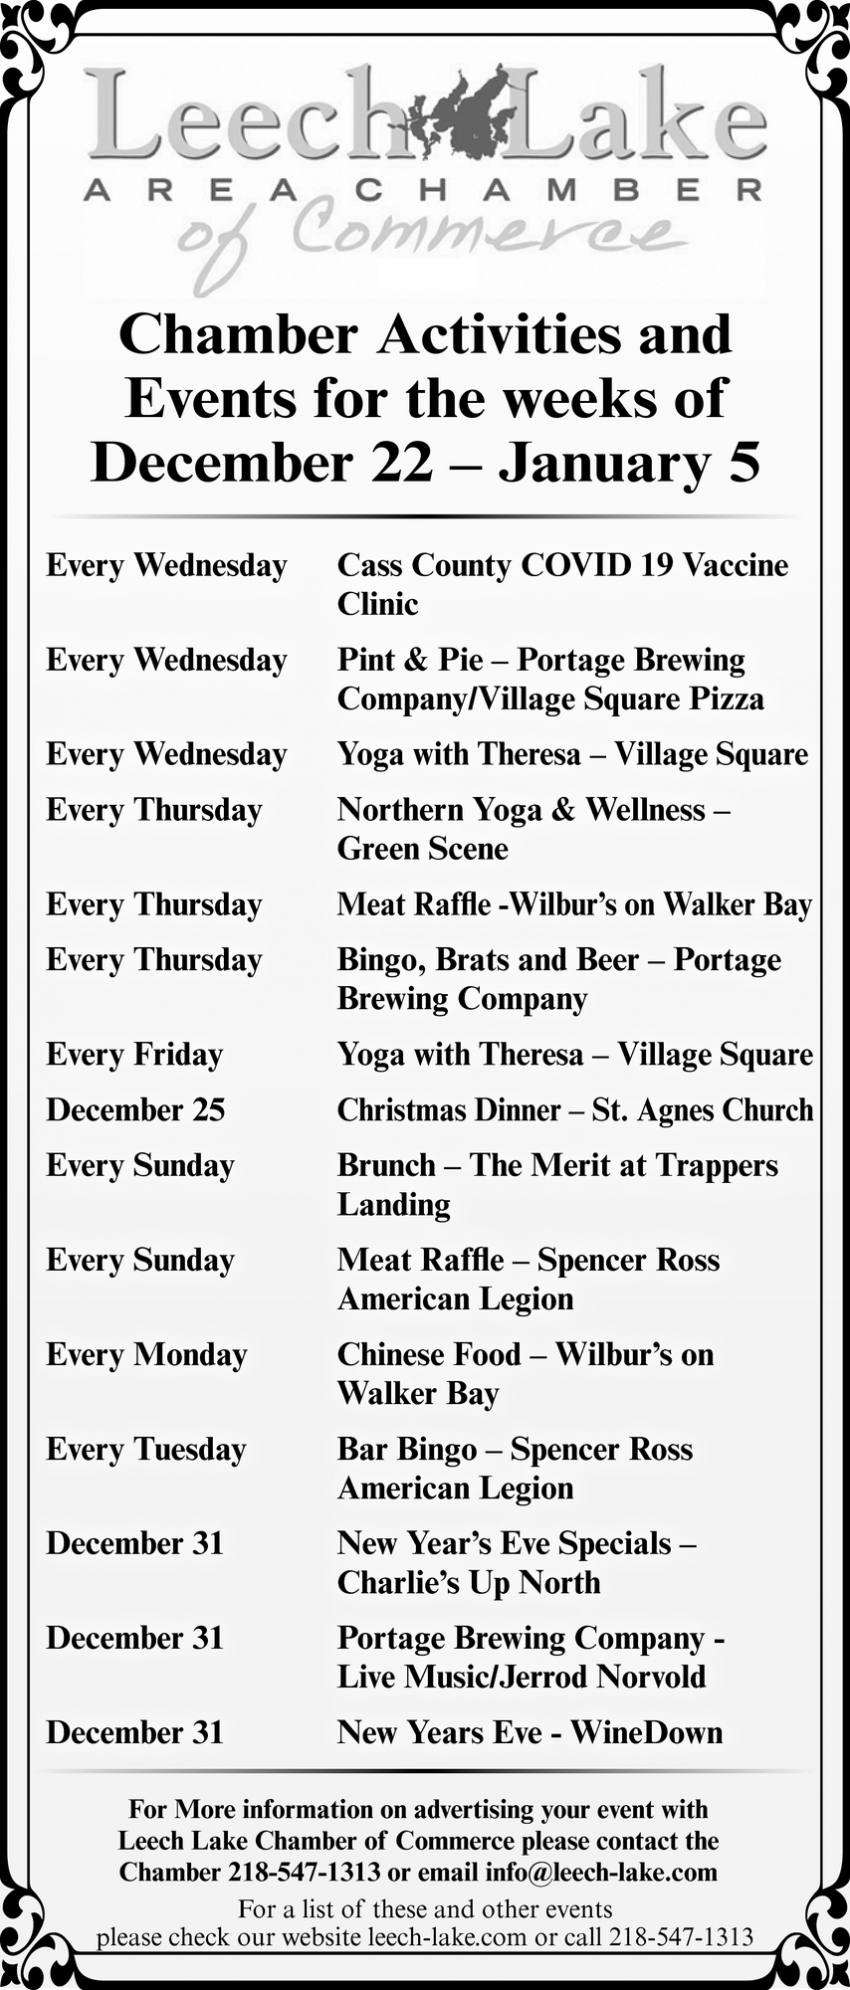 Chamber Activities And Events For The Weeks Of December 22 - January 5